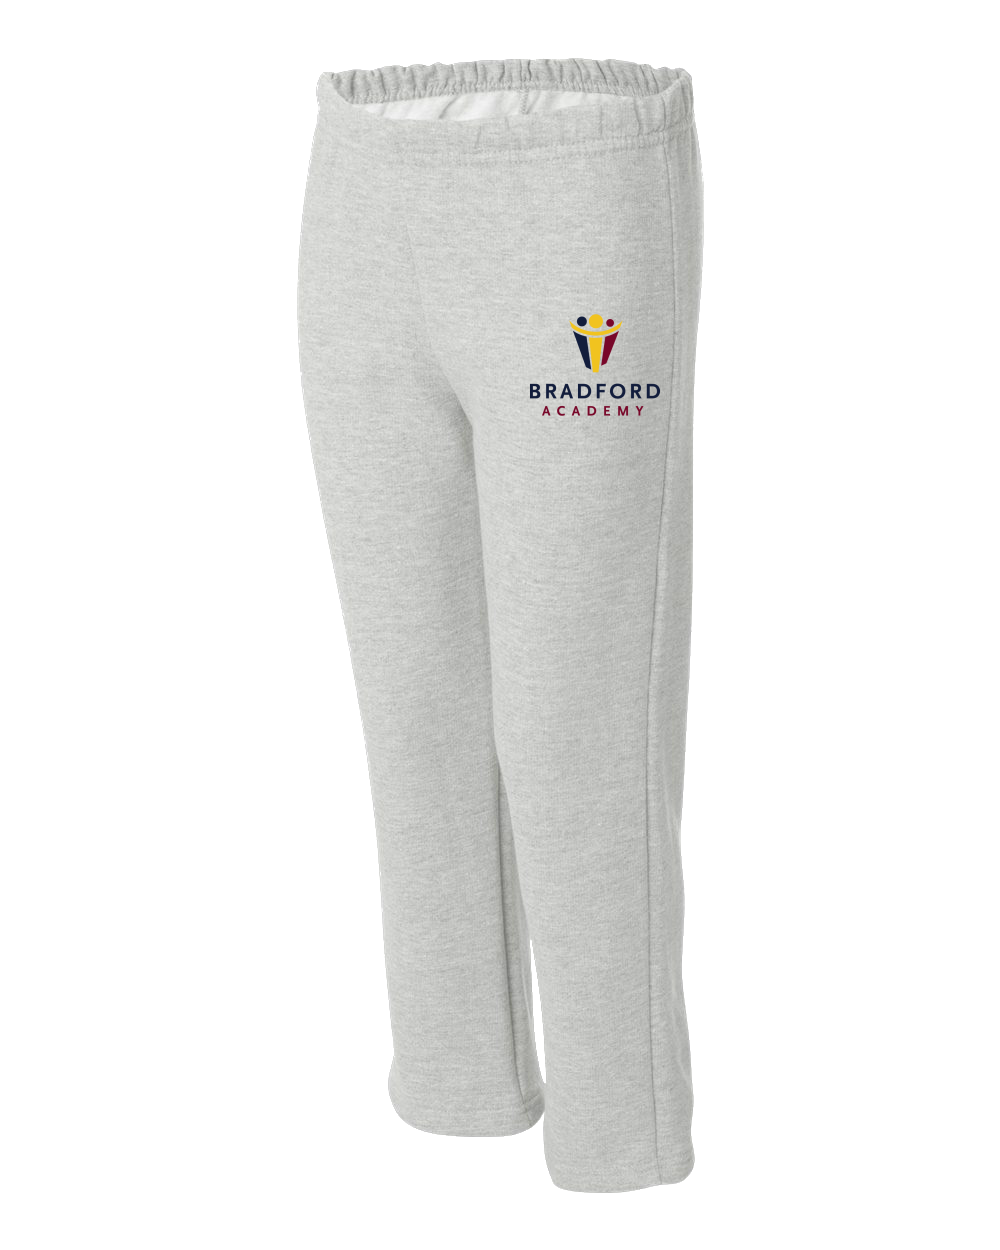 Youth Open Cuffed Sweatpant Grey Bradford Academy Embroidered Logo Light Sweatpant